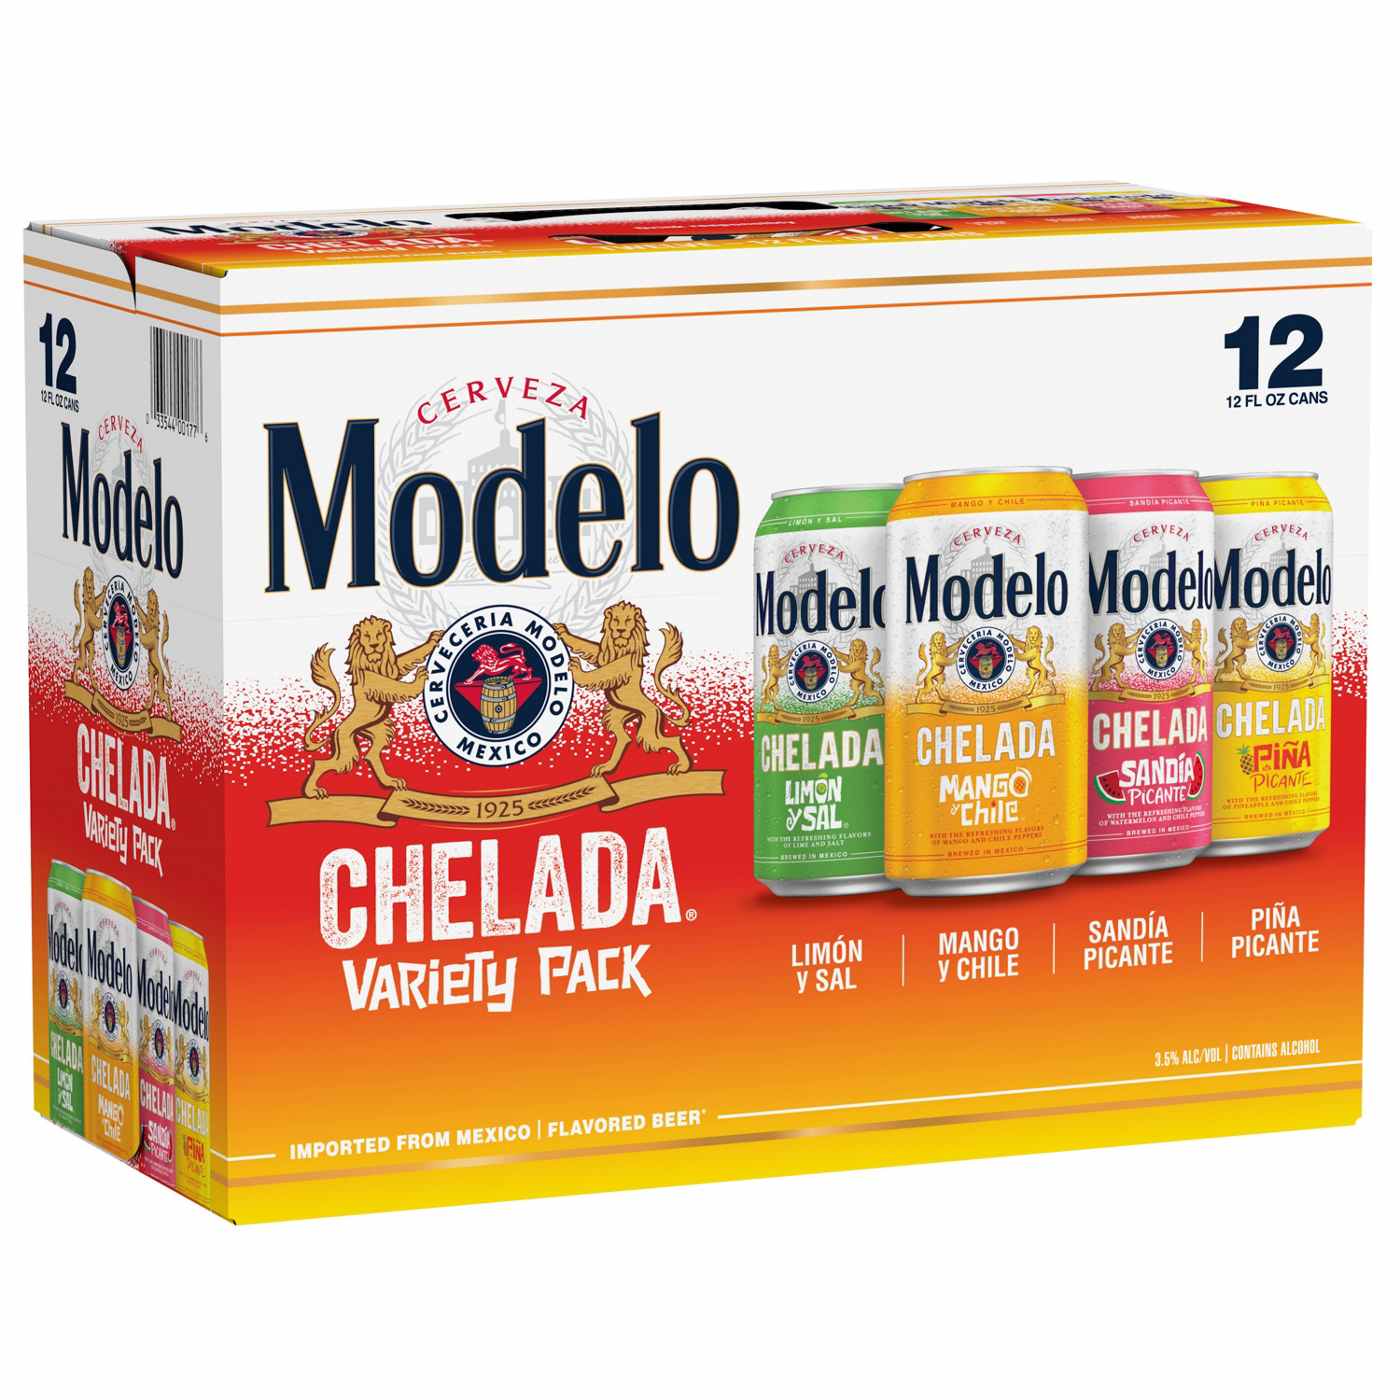 Modelo Chelada Variety Pack Mexican Import Flavored Beer 12 oz Cans, 12 pk; image 1 of 11